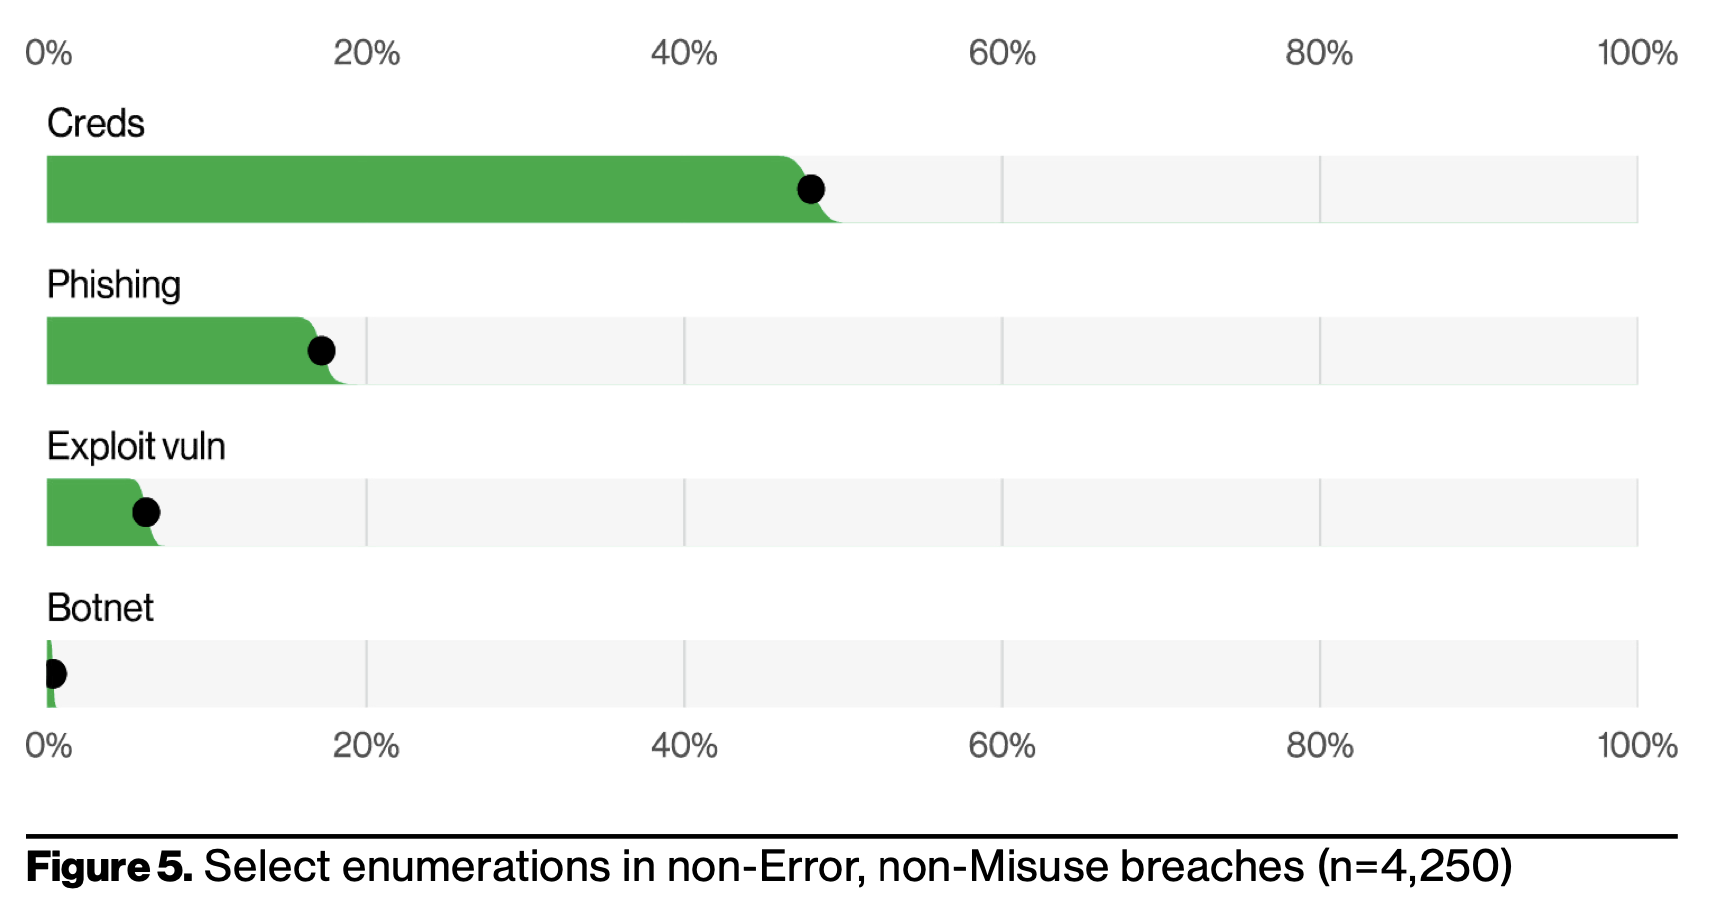 A chart showing that (stolen) credentials are by far and away the most common source of non-error, min-misuse breaches, followed by phishing, with both being more prevalent than exploited vulnerabilities (Source: Verizon DBIR 2022)